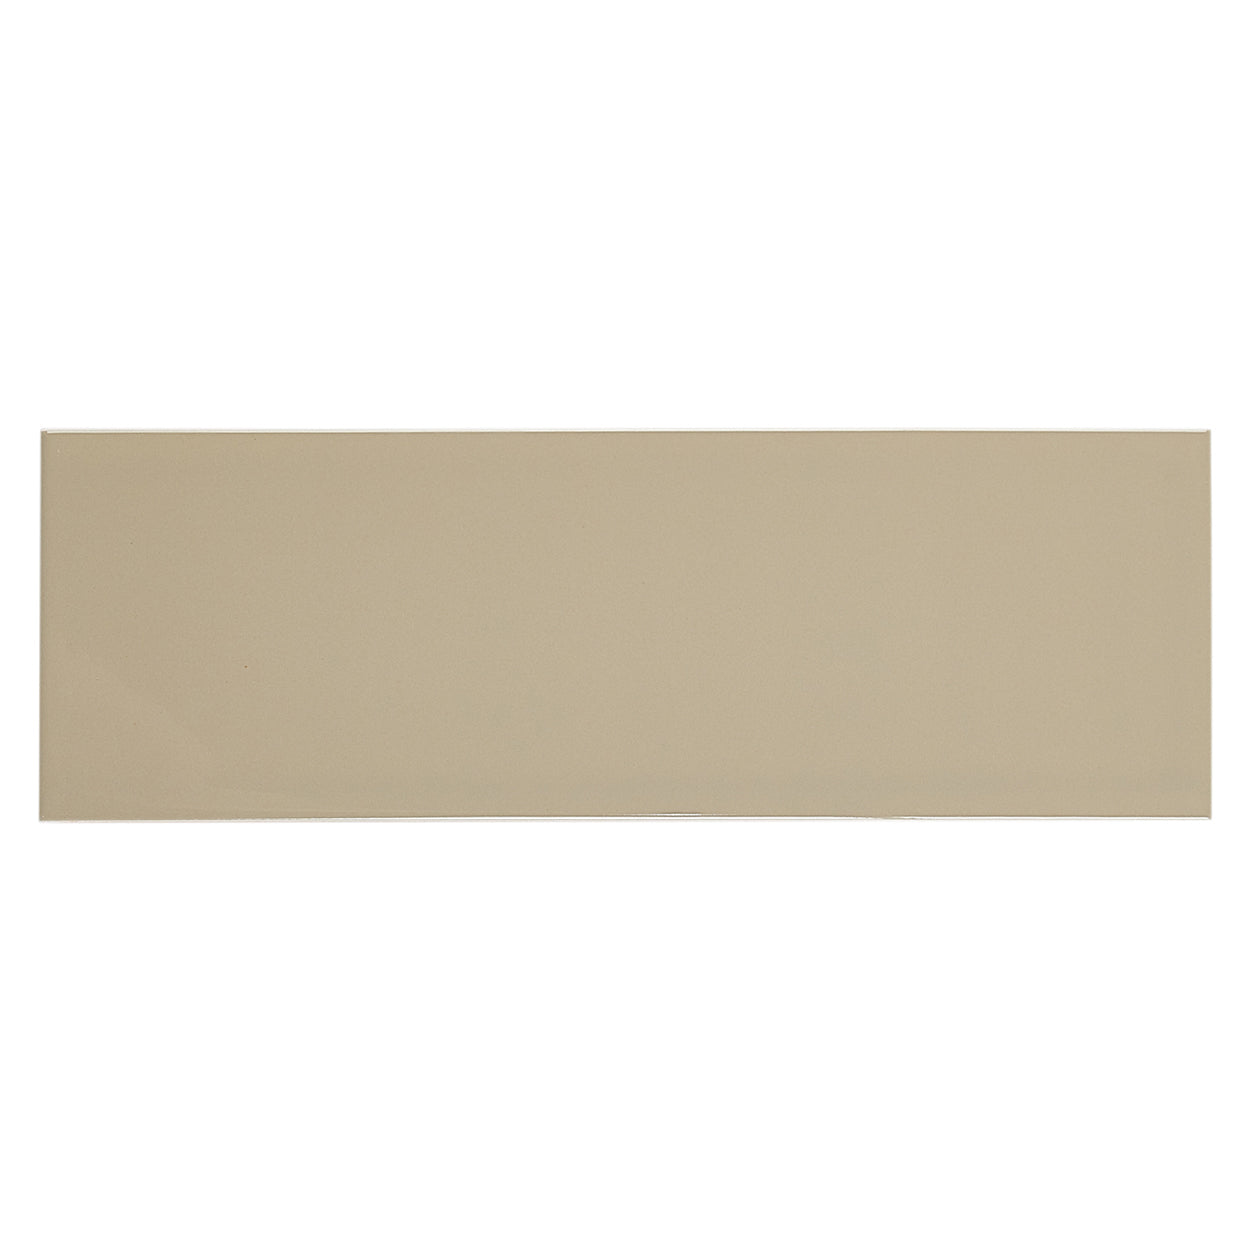 CommodiTile - Carrollton 4 in. x 12 in. Wall Tile - Sand Gloss